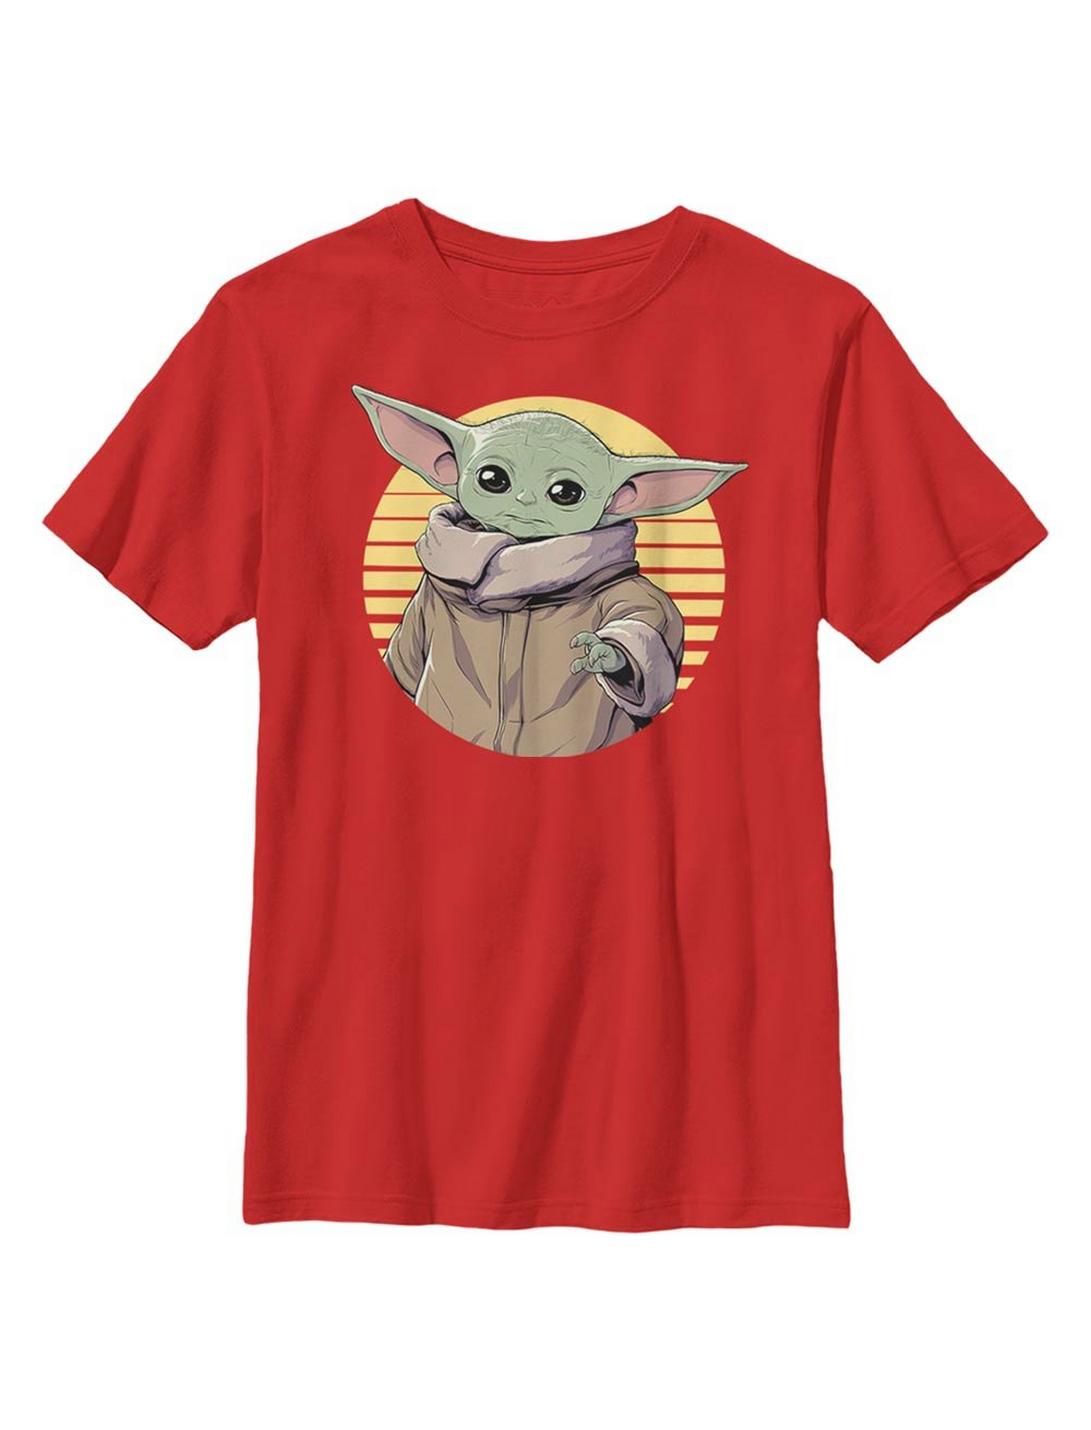 Star Wars The Mandalorian The Child Circle Illustration Youth T-Shirt, RED, hi-res